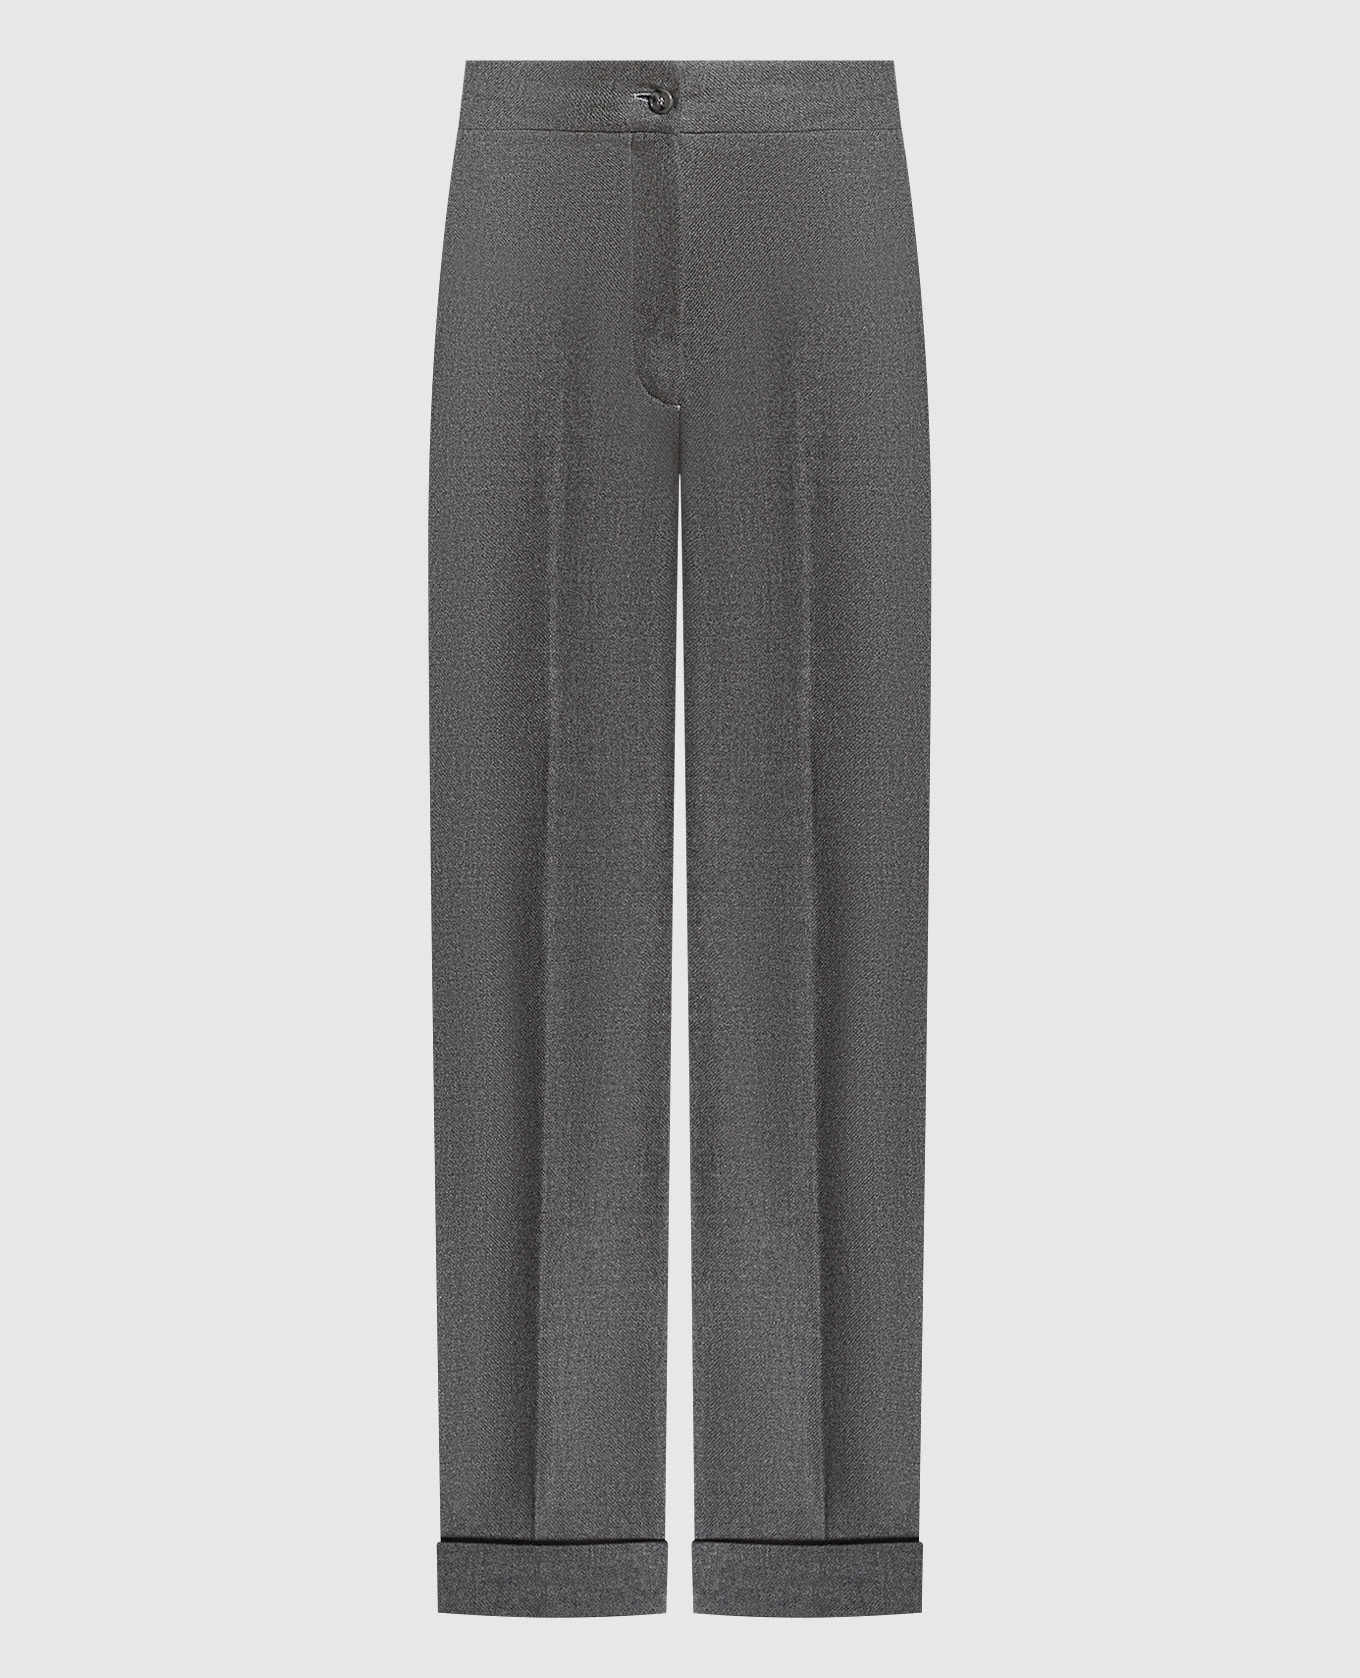 Gray wool and cashmere trousers